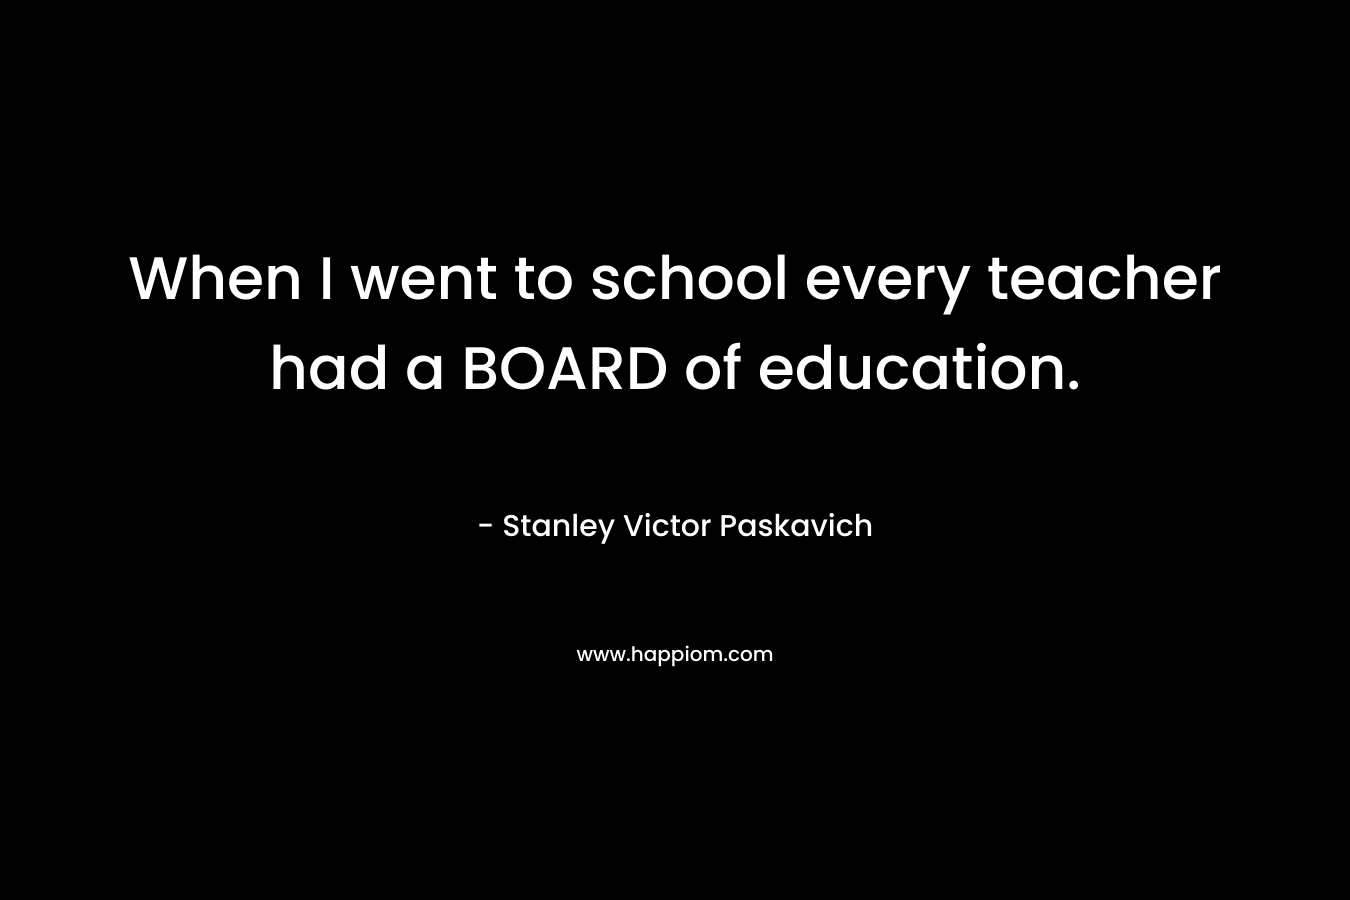 When I went to school every teacher had a BOARD of education. – Stanley Victor Paskavich